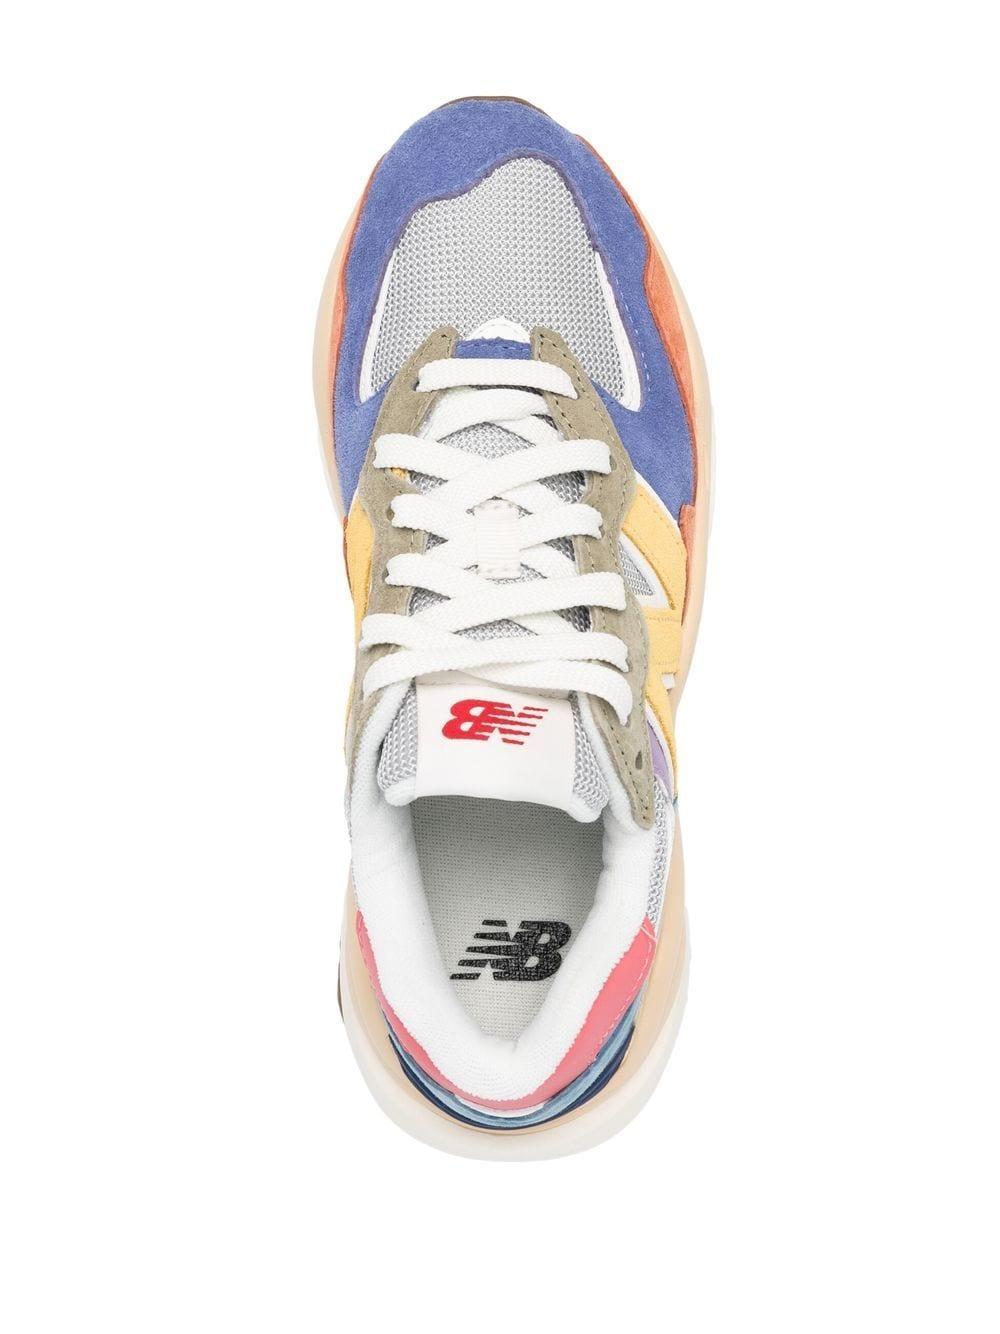 New Balance Colour-block Sneakers in Blue | Lyst